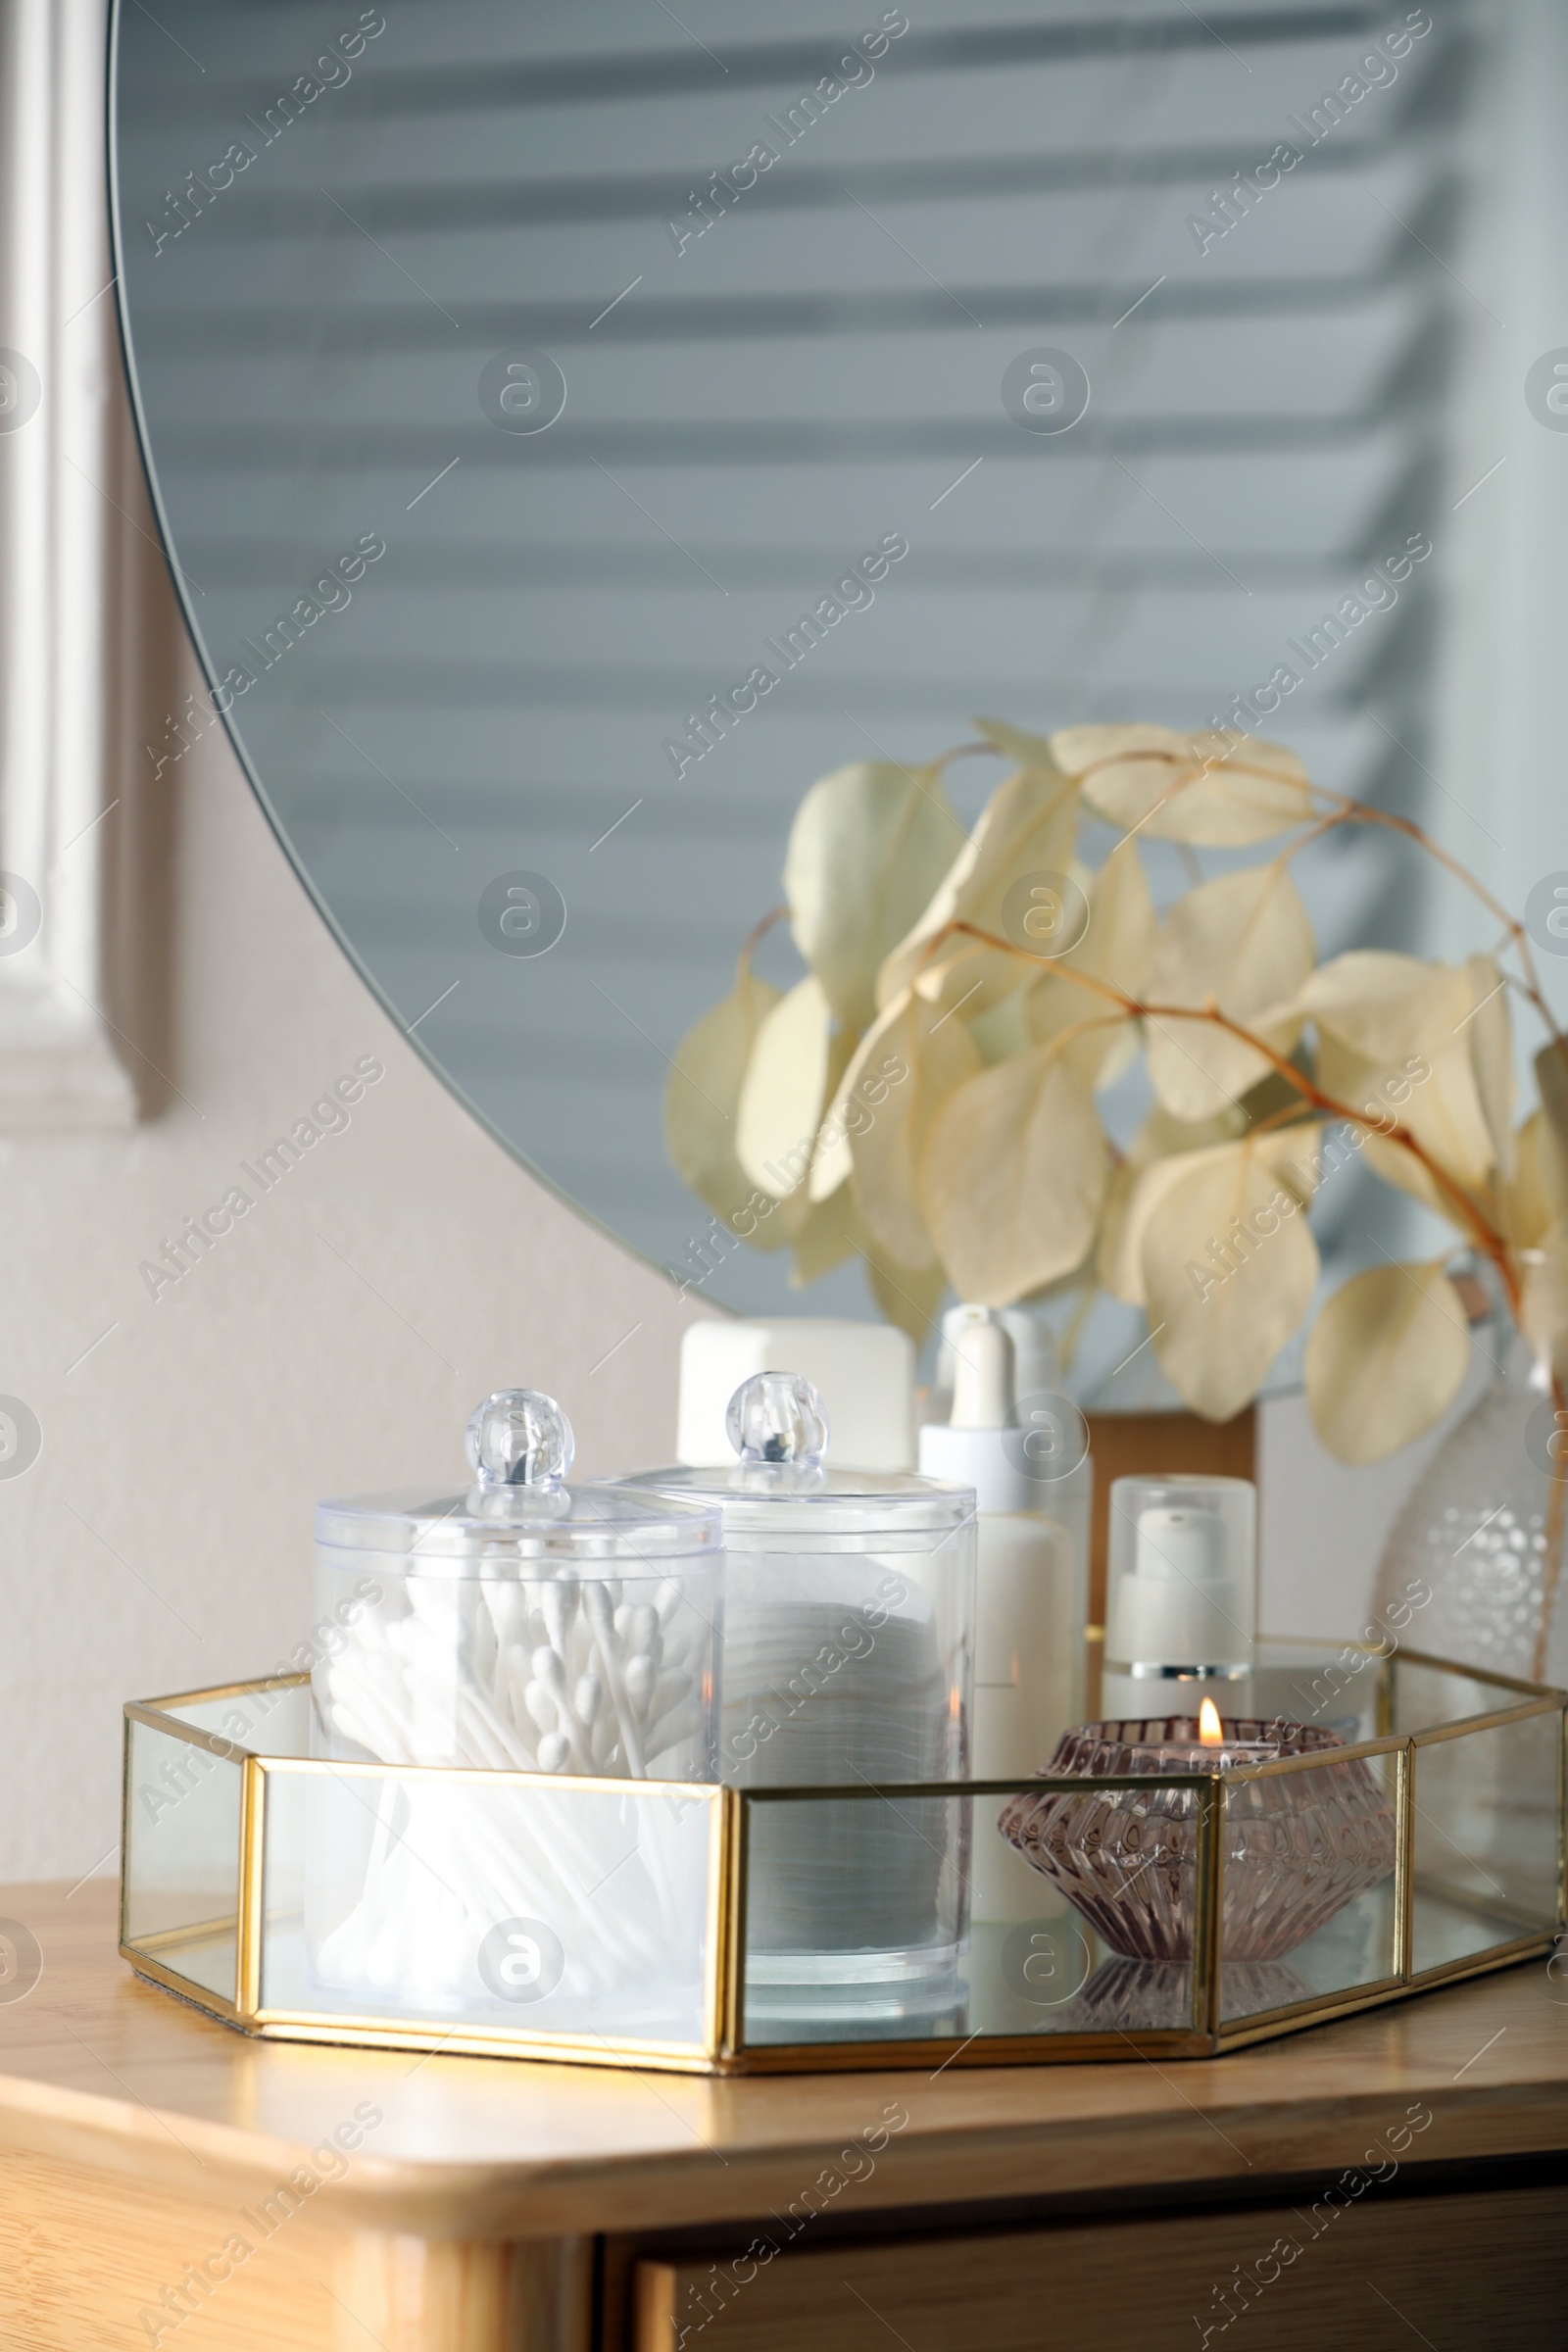 Photo of Containers with cotton swabs, pads and burning candle near cosmetic products on dressing table